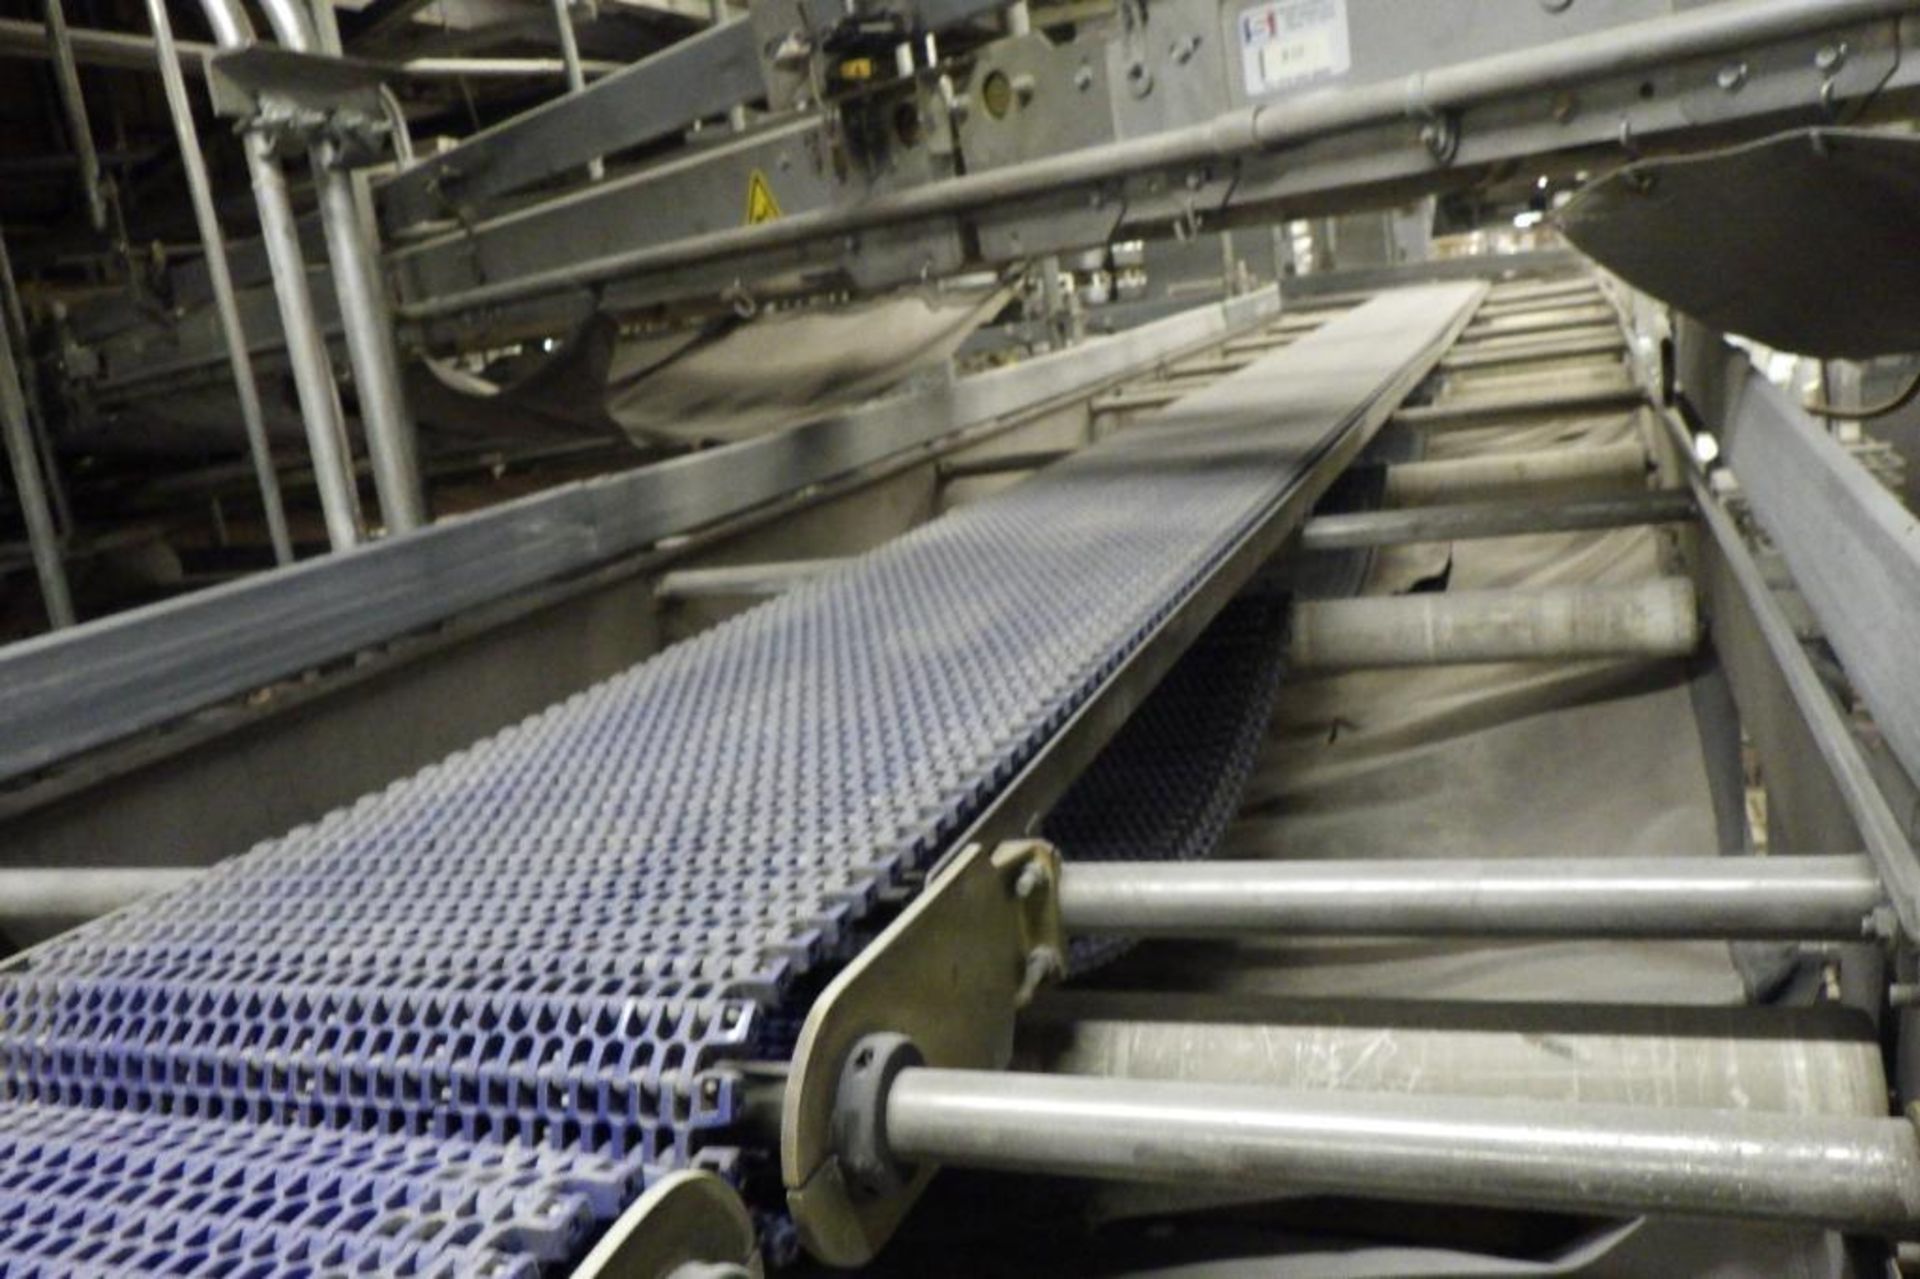 Stewart systems empty pan conveyor - Image 14 of 27